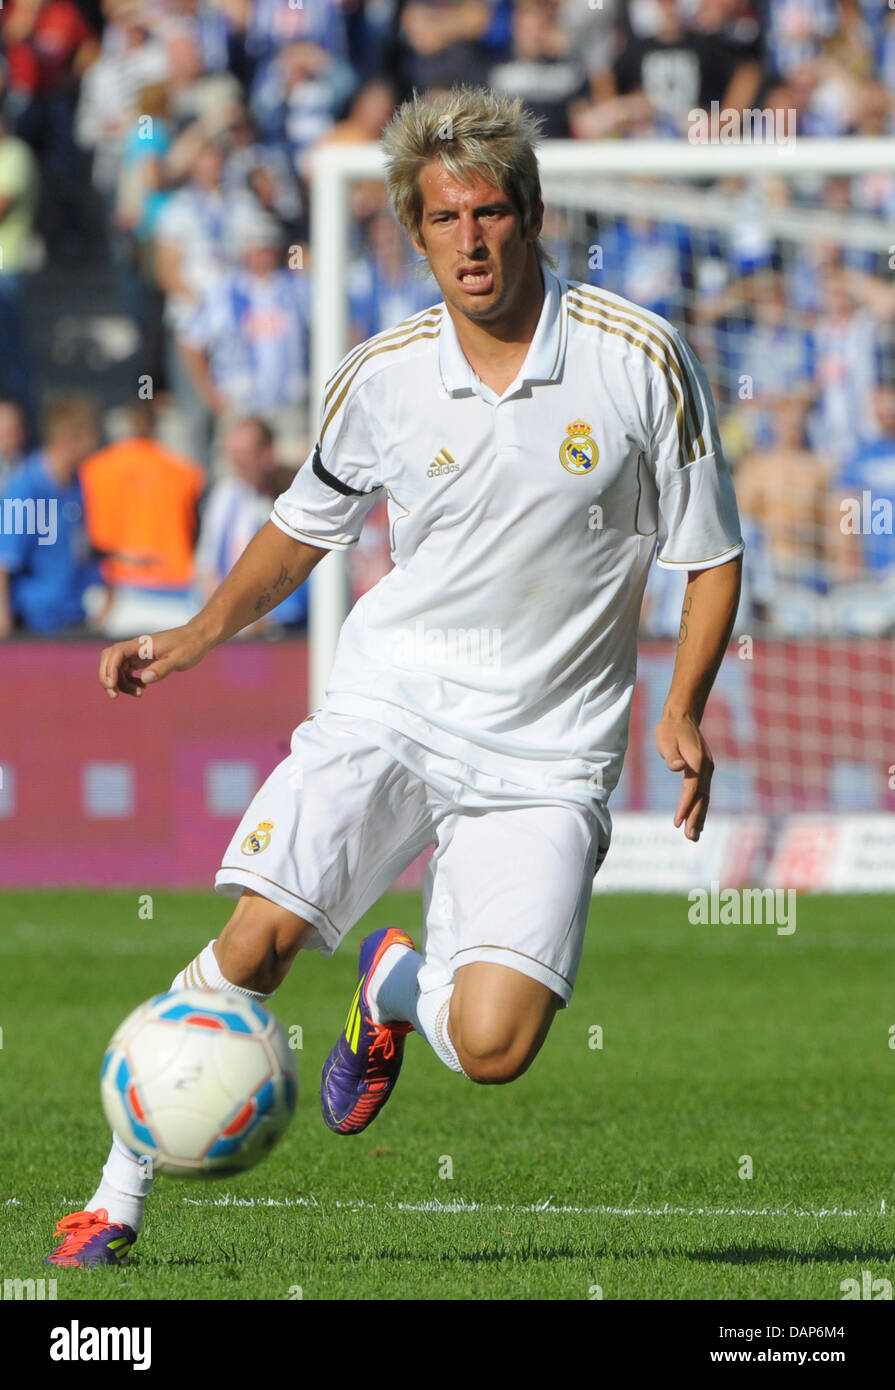 Real's Fabio Coentrao dribbles the ball during the friendly soccer match between Hertha BSC and Real Madrid at the Olympic Stadium in Berlin, Germany, 27 July 2011. Photo: Soeren Stache Stock Photo